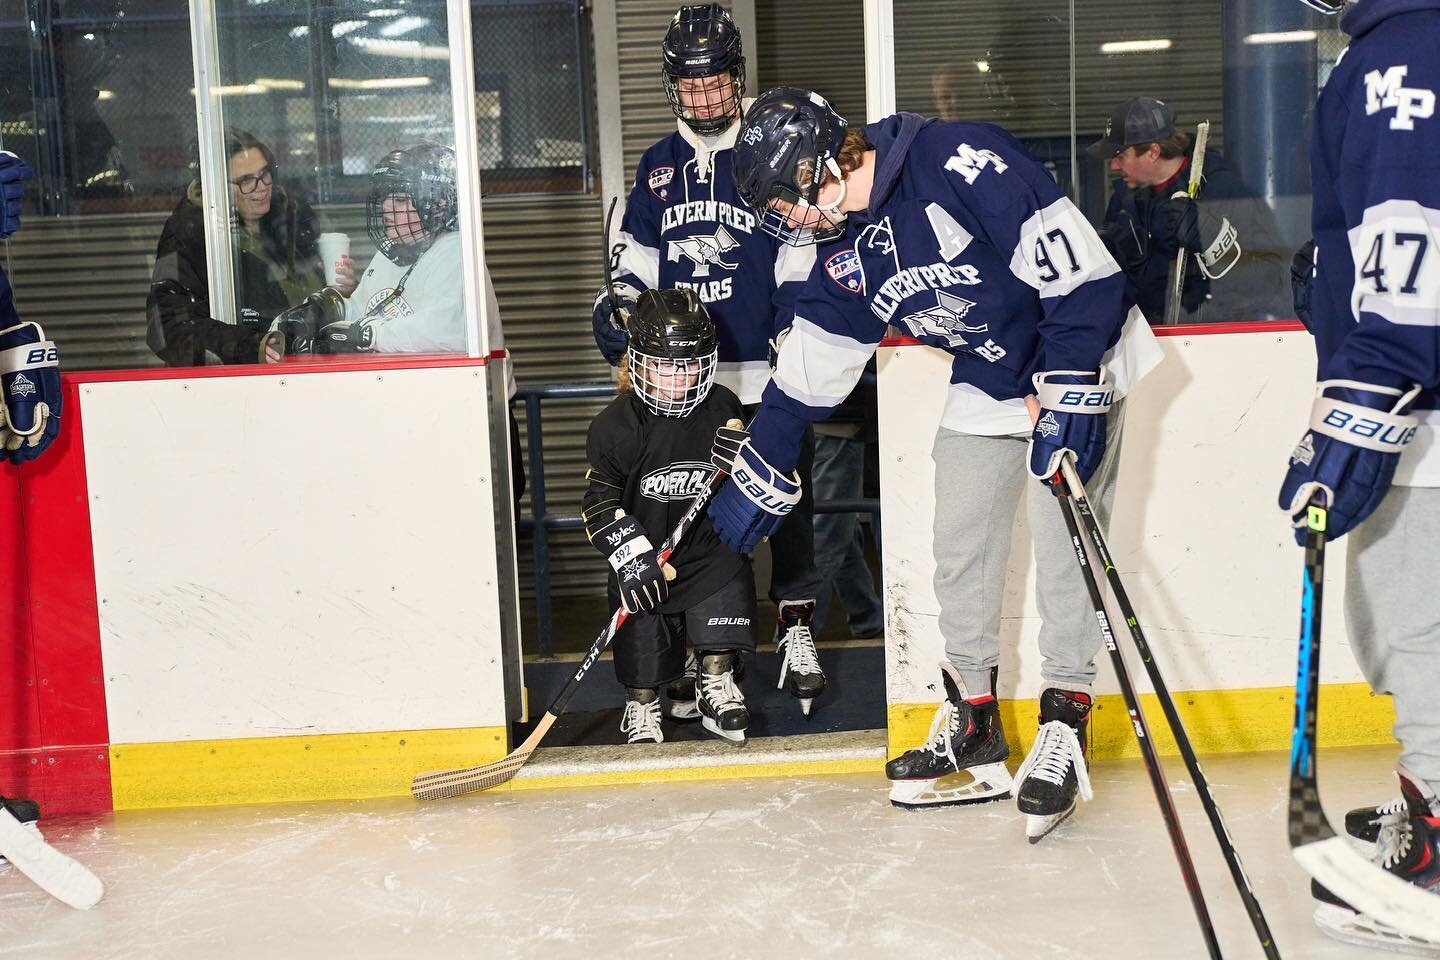 Are you looking to volunteer at our Try Blind Hockey events?! We are currently looking for volunteers to be on ice guides for our athletes! Click the link in our bio to sign up!
📸: @noahwillman